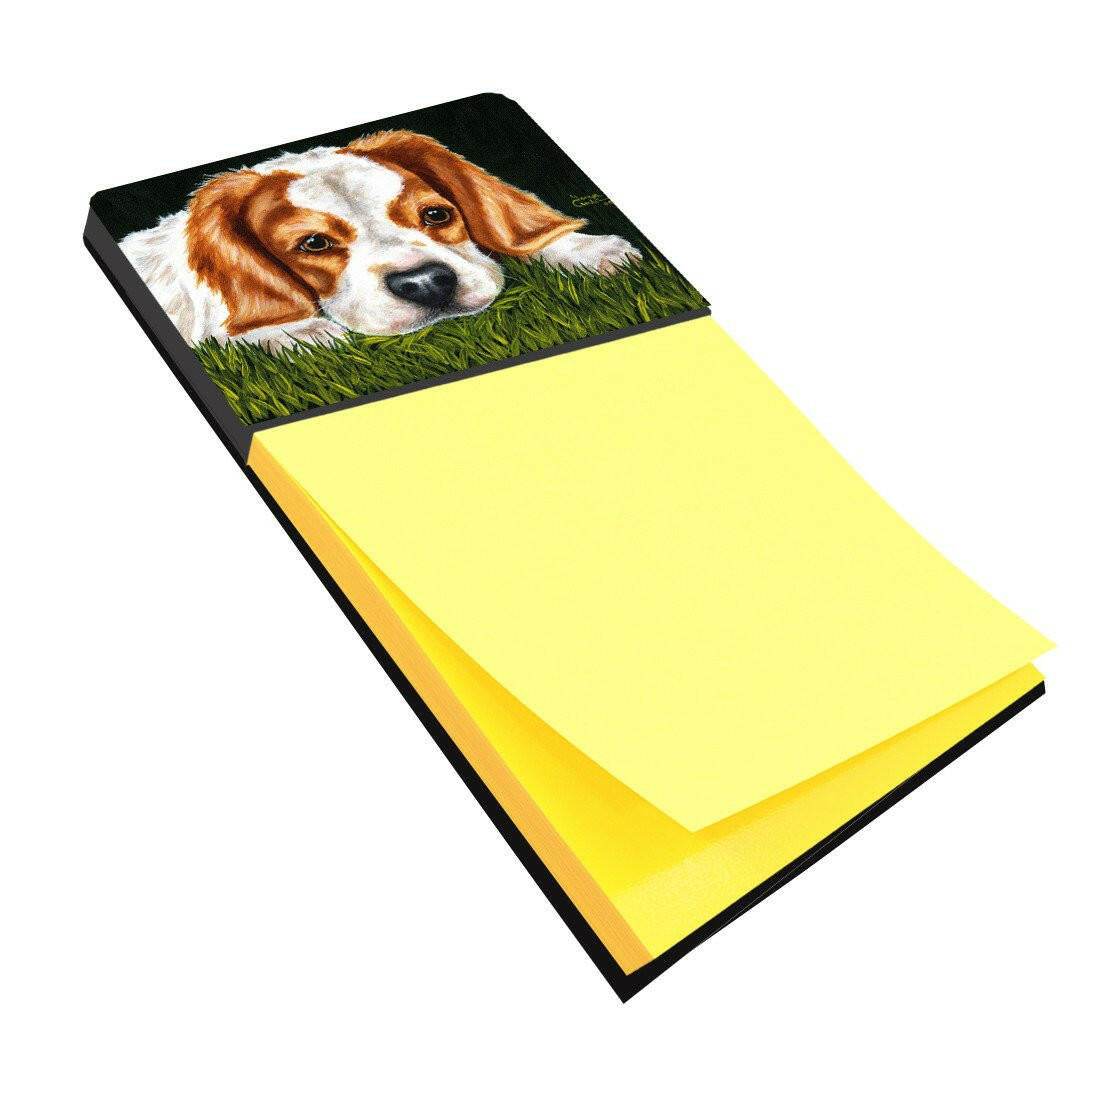 Cavalier Spaniel in the Grass Sticky Note Holder AMB1395SN by Caroline's Treasures